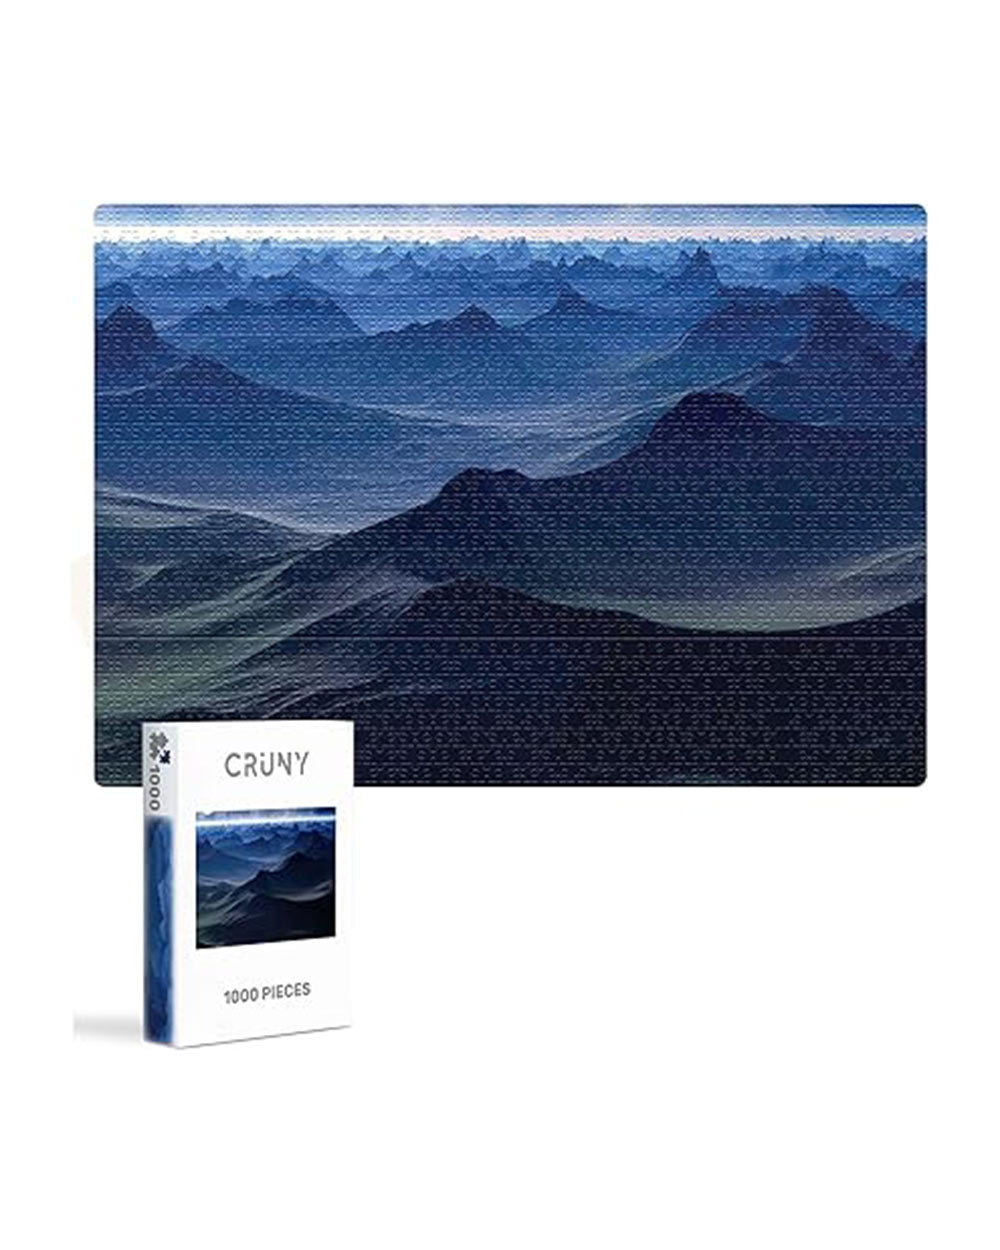 CRUNY 1000 Piece Mountain Jigsaw Puzzle for Adults